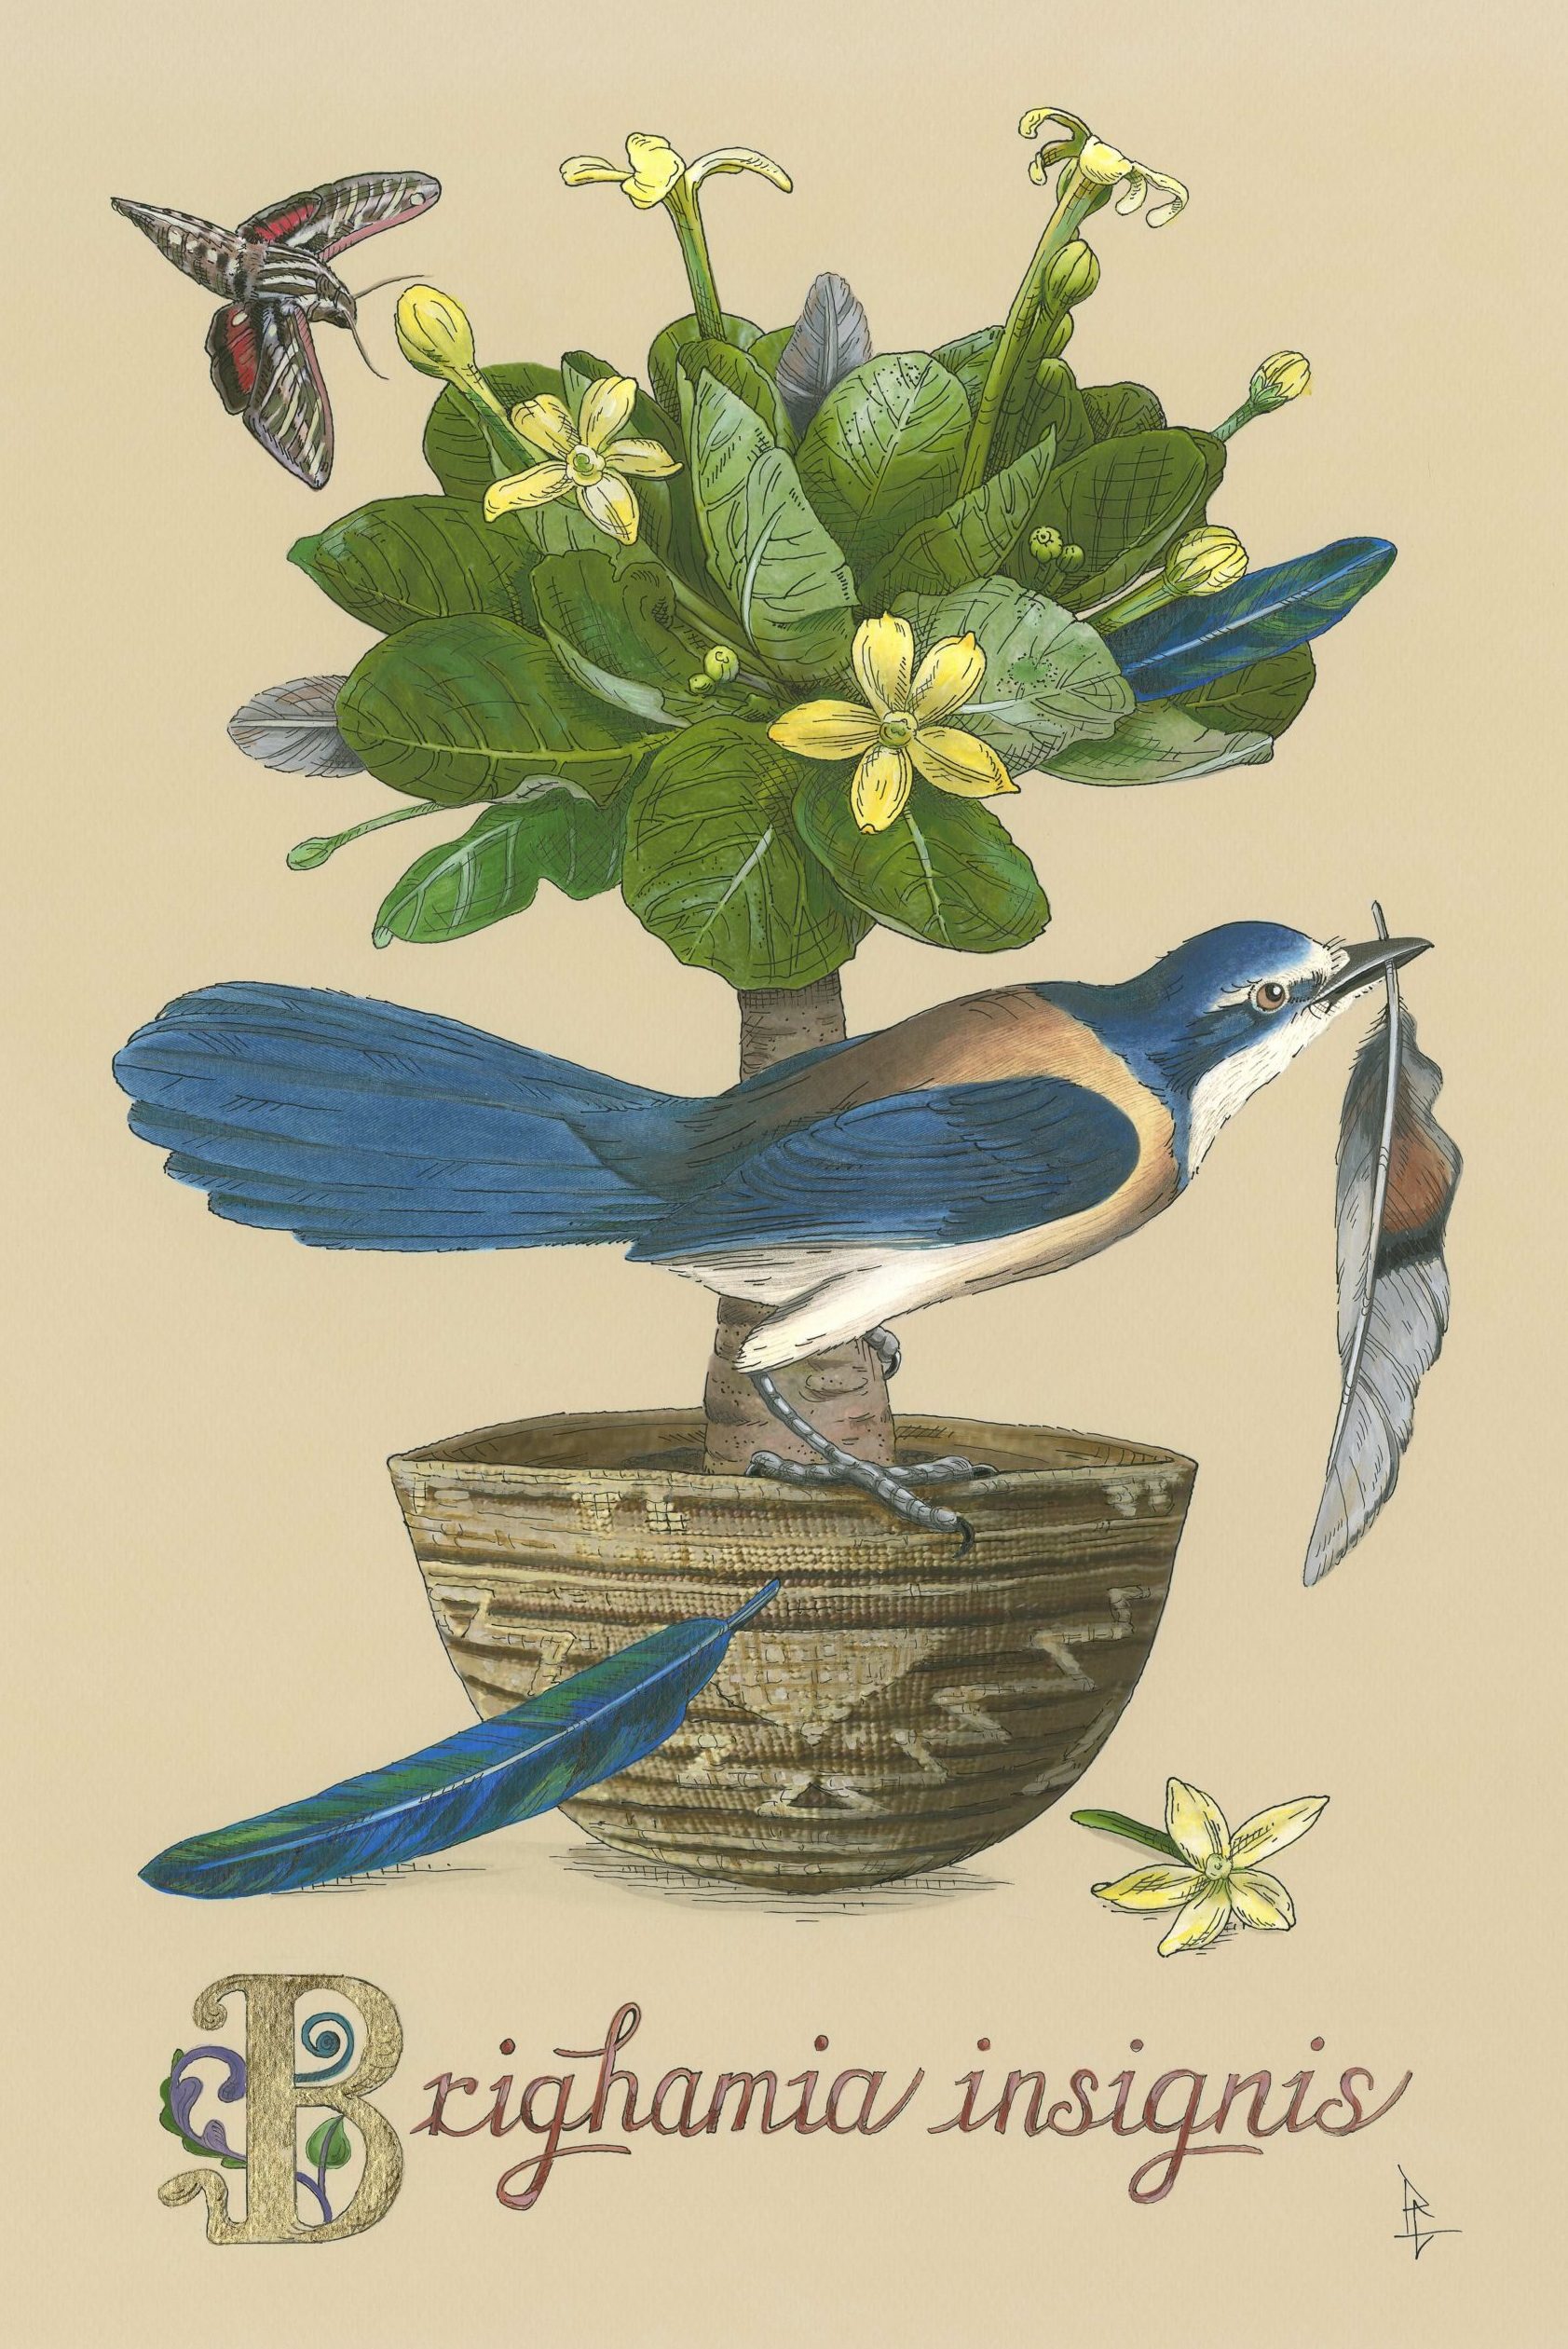 

											Penelope Gottlieb</b>

											<em>
												Penelope Gottlieb  New Works</em> 

											<h4>
												June 25 - July 24, 2021											</h4>

		                																																<i>Brighamia insignis,</i>  
																																								2020-2021, 
																																								acrylic and ink over a digital reproduction of an Audubon print, 
																																								18 x 12 inches 
																								
		                				